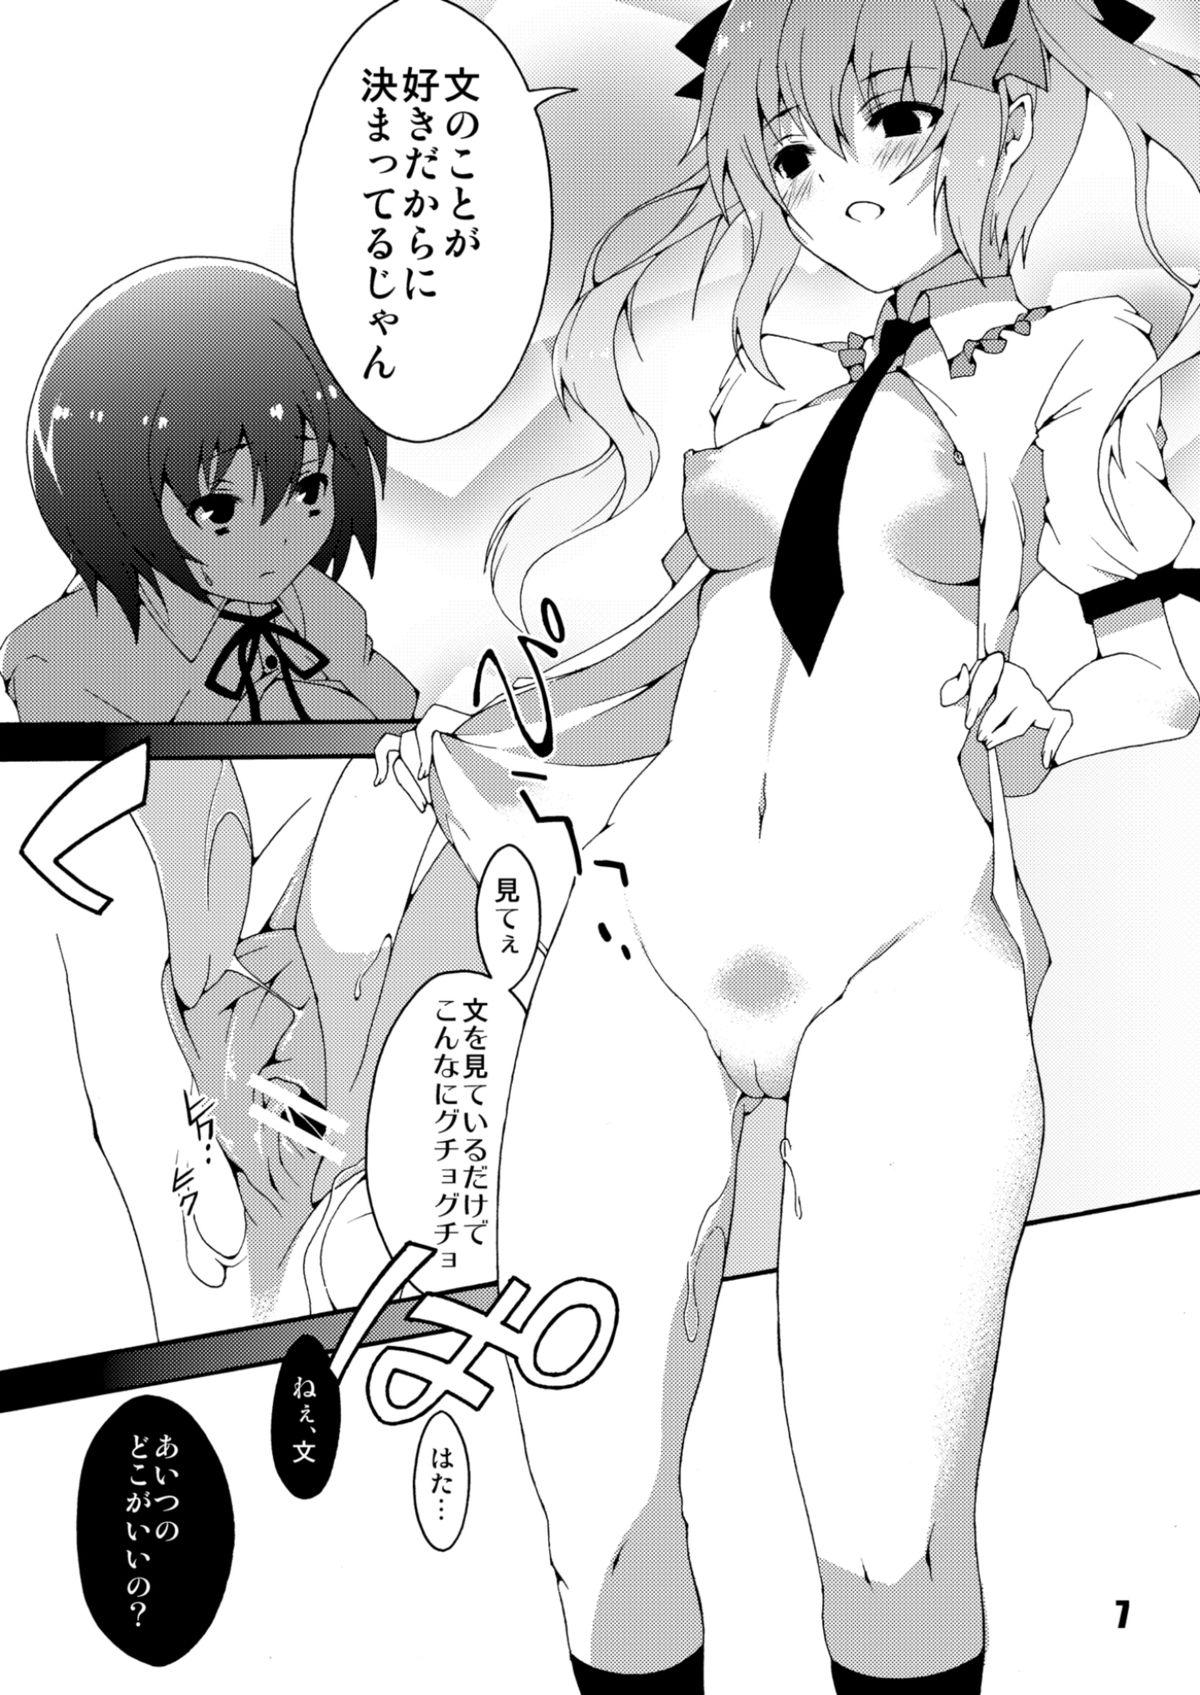 Caseiro Kanojo no Ryuugi There is no such thing as light. - Touhou project Gay Medic - Page 8